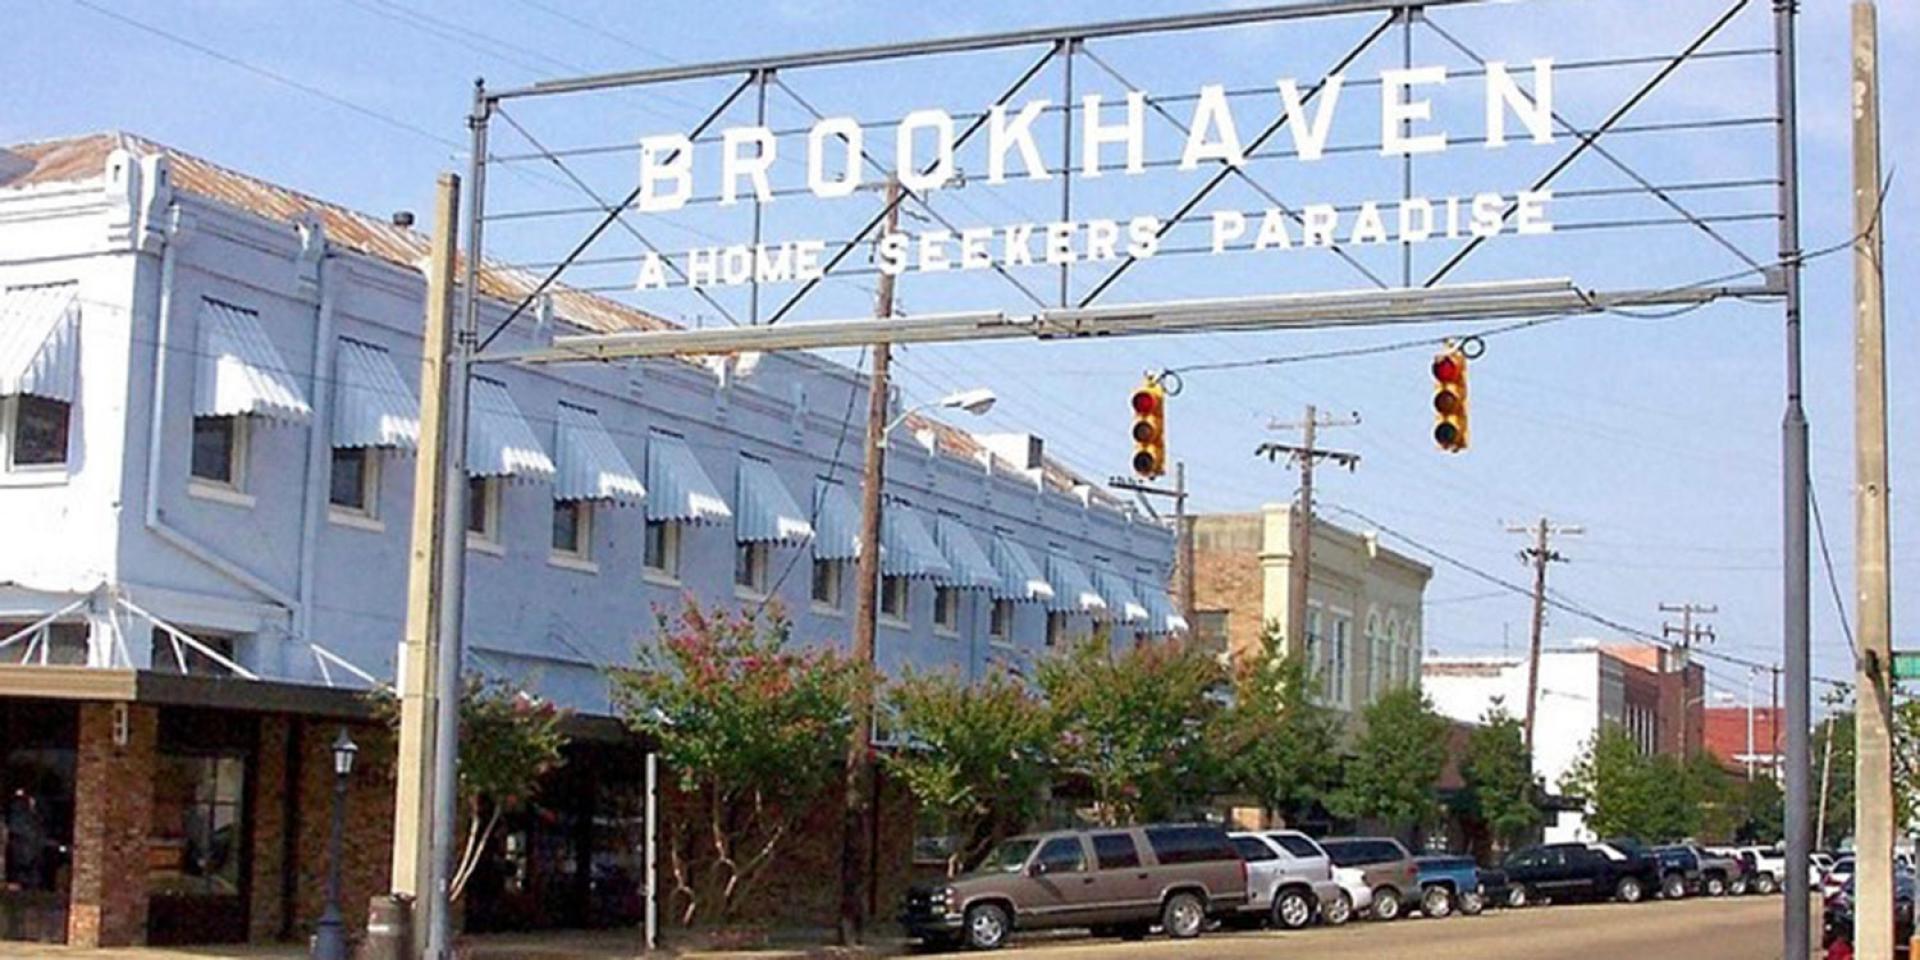 Photo of Brookhaven, a rural town